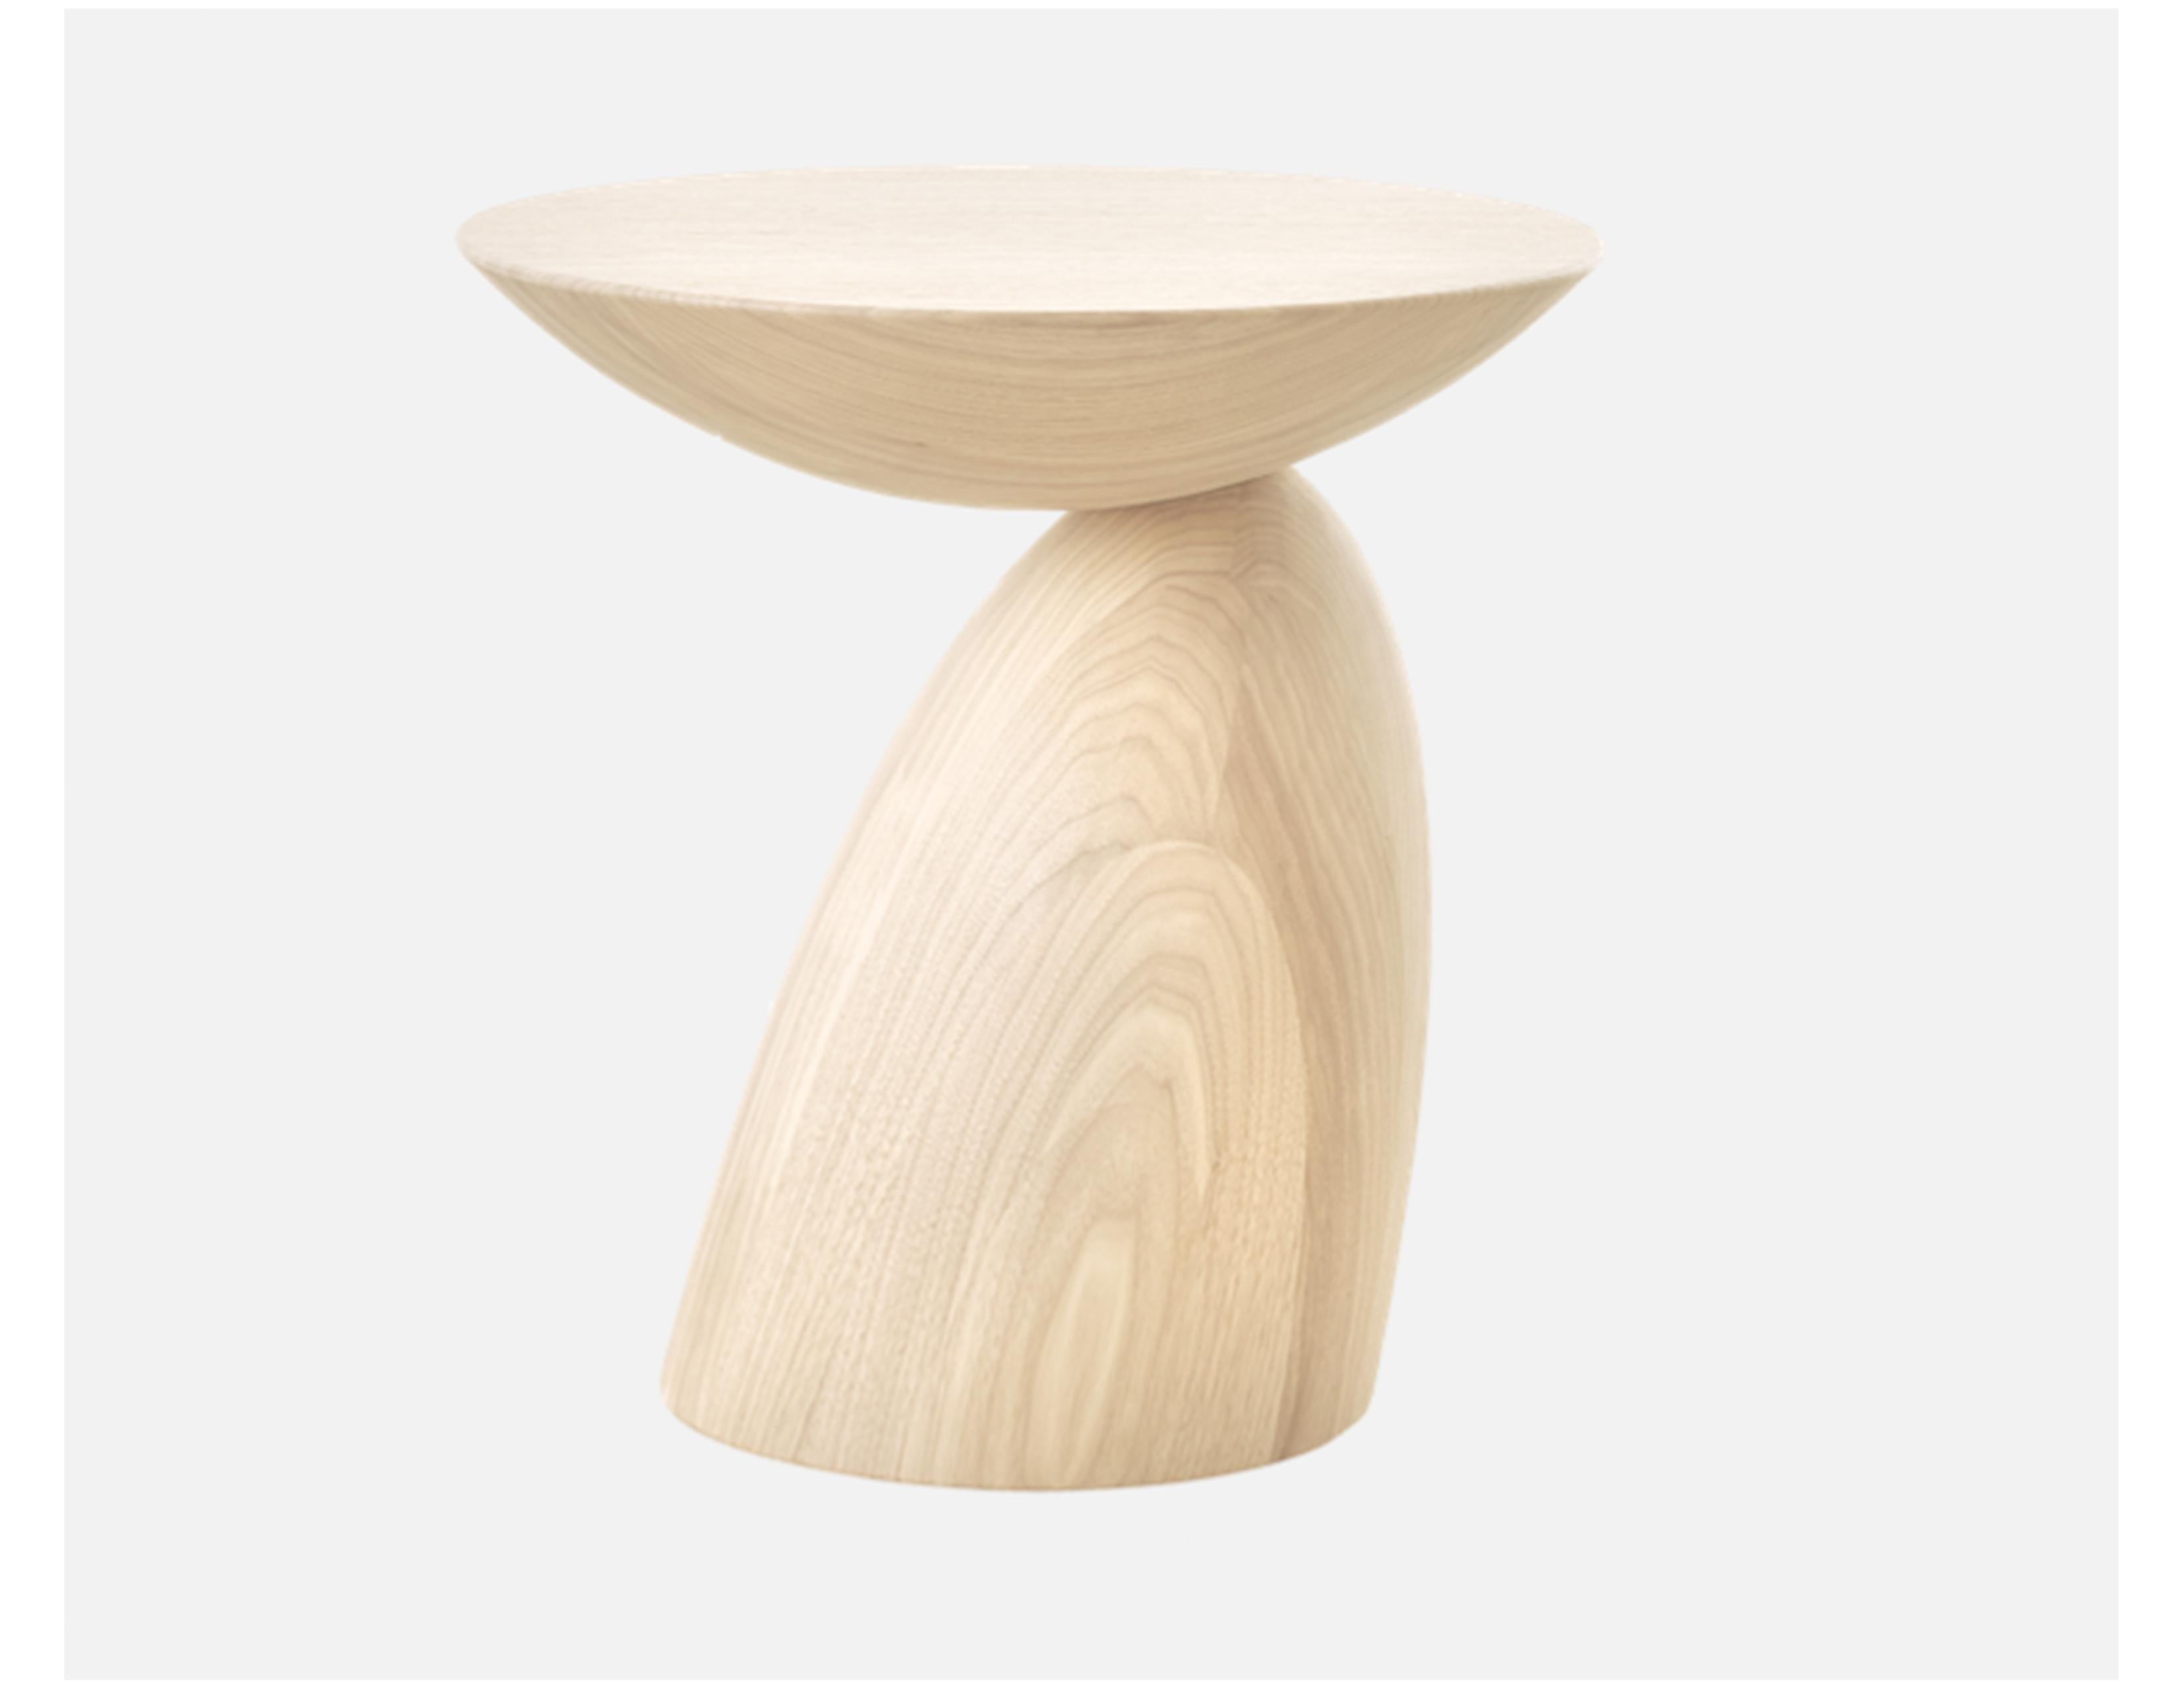 Modern Eero Aarnio Small Natural Parabel Table For Sale